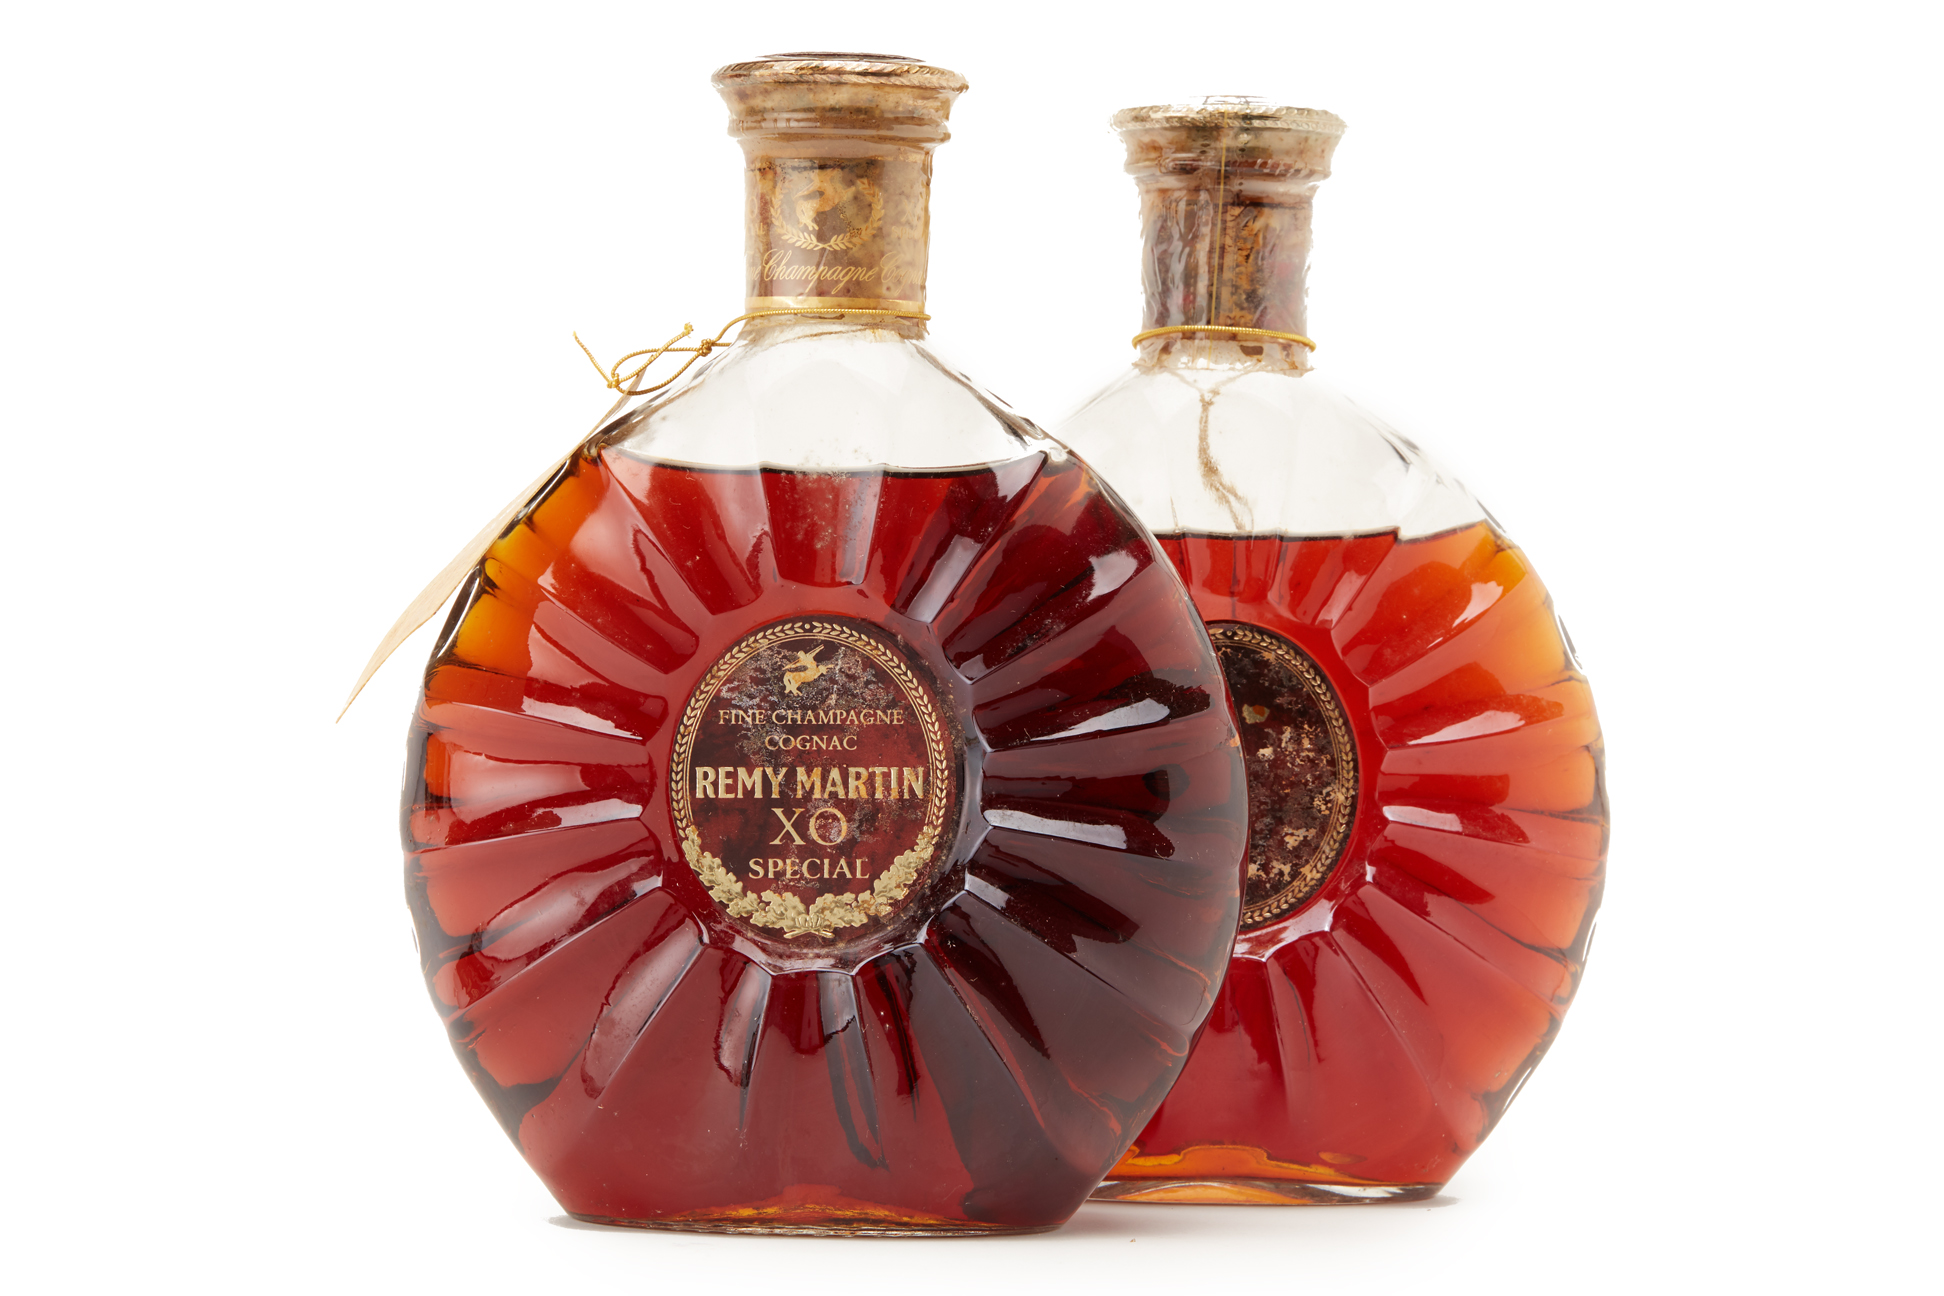 REMY MARTIN XO SPECIAL FINE CHAMPAGNE COGNAC (TWO BOTTLES) - Image 2 of 2